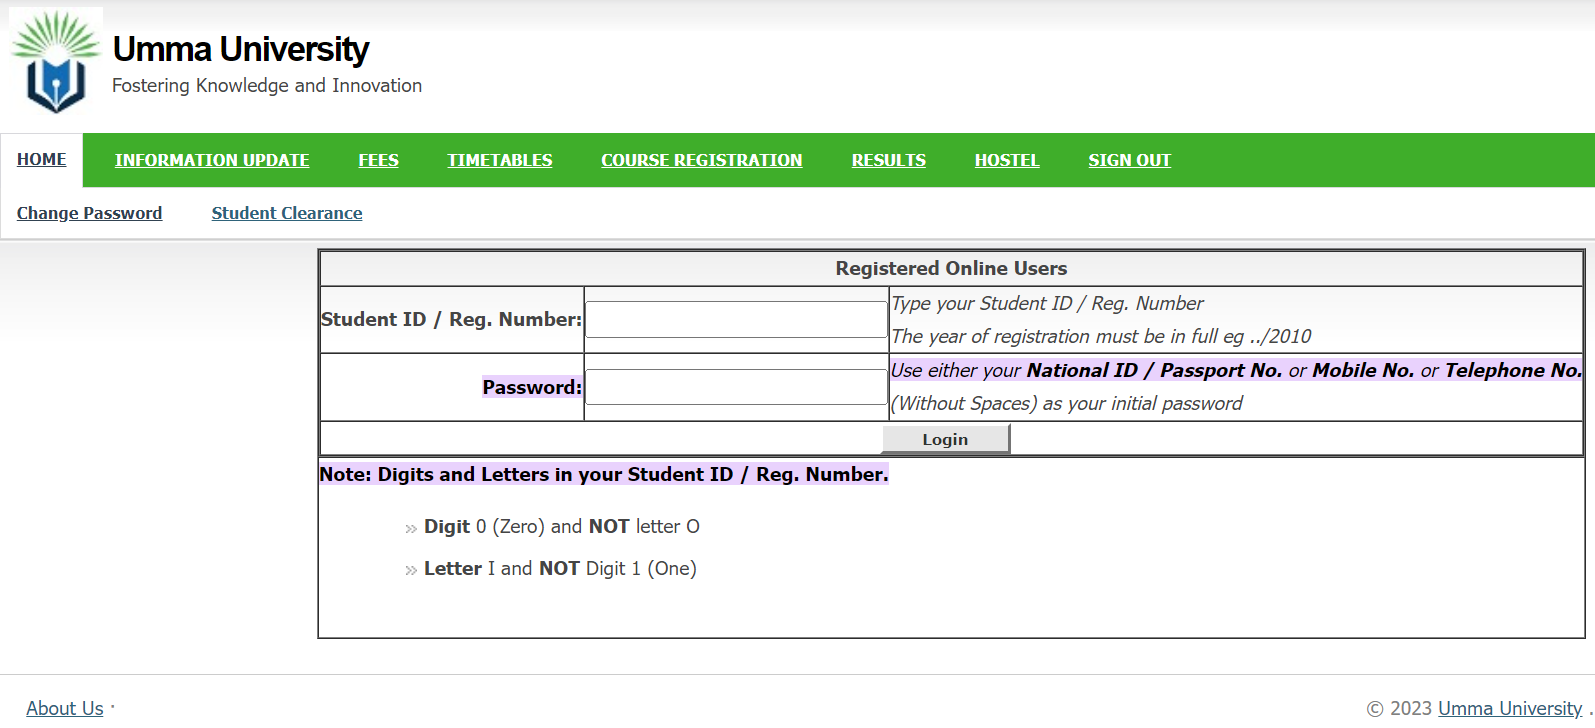 How to Login to the UMMA University Student Portal